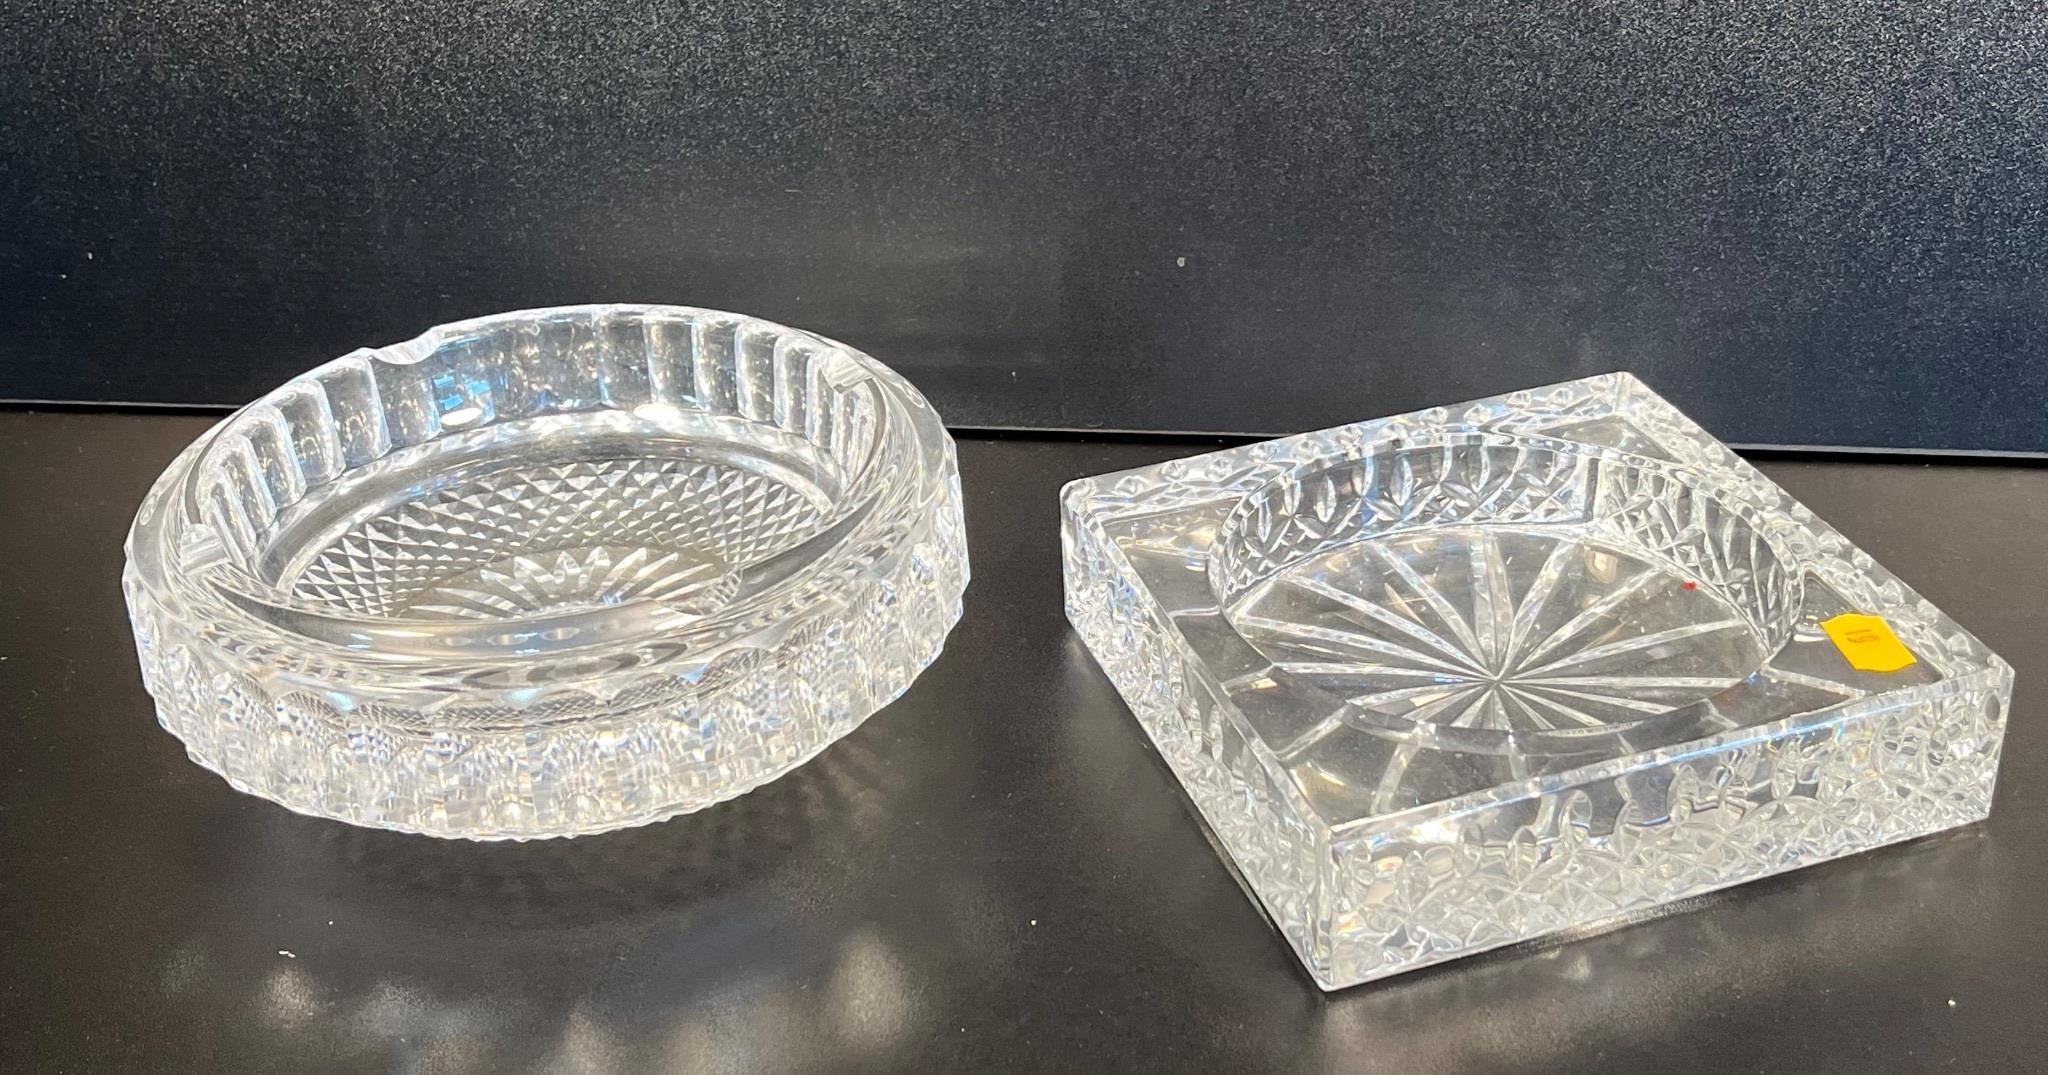 3 Pieces of Waterford Crystal: 2 Ashtrays & Bowl